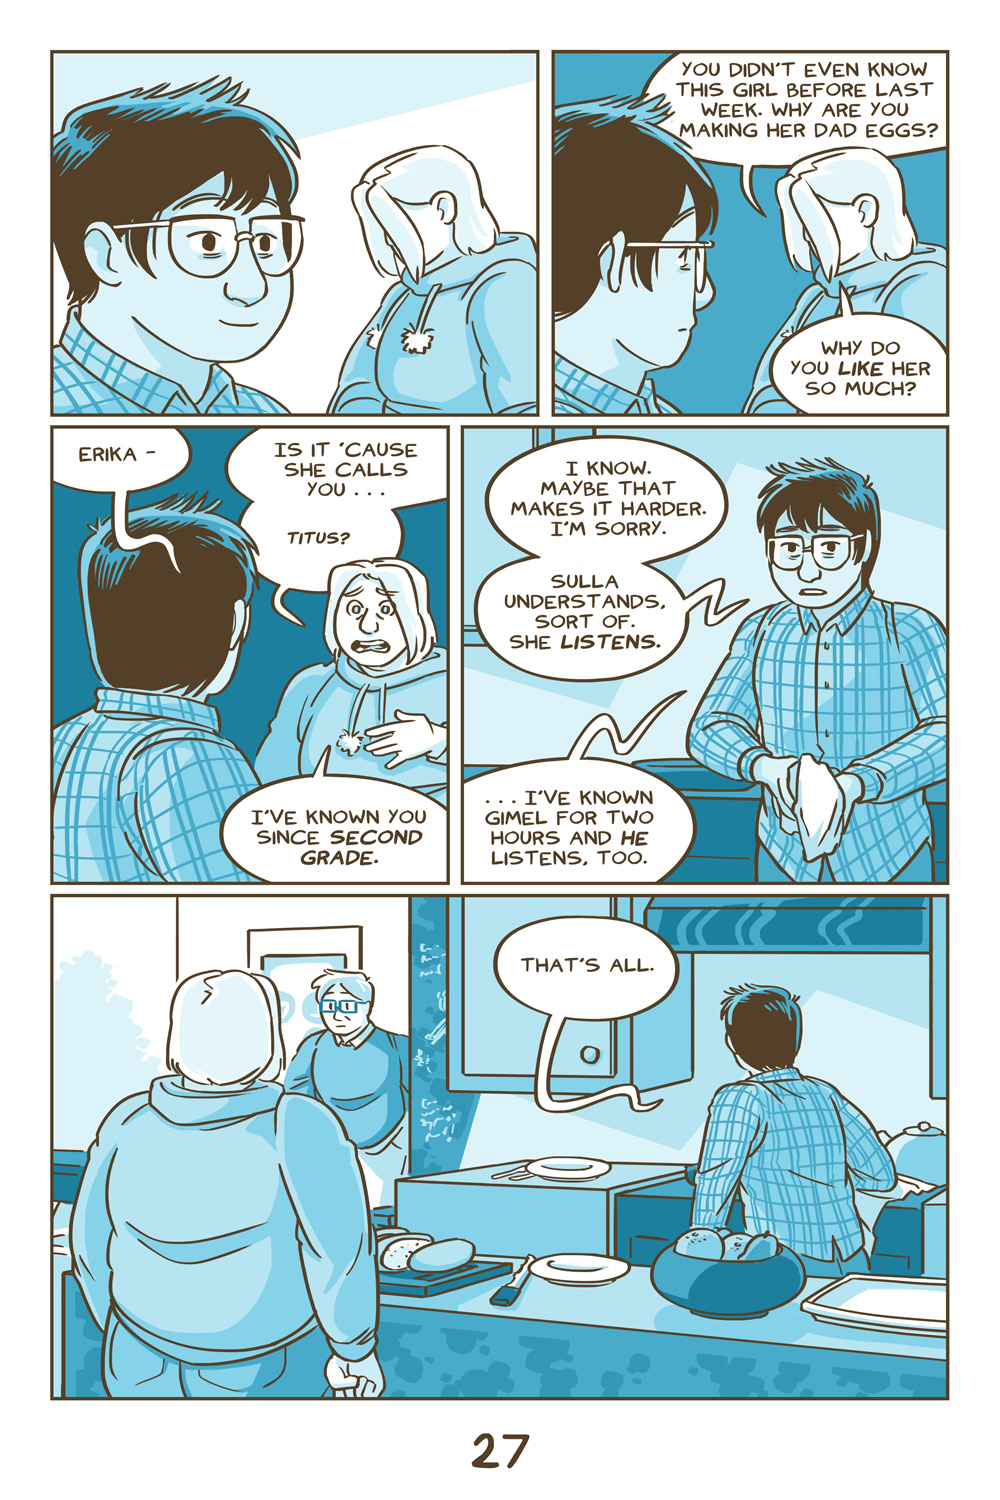 Chapter 7, Page 27